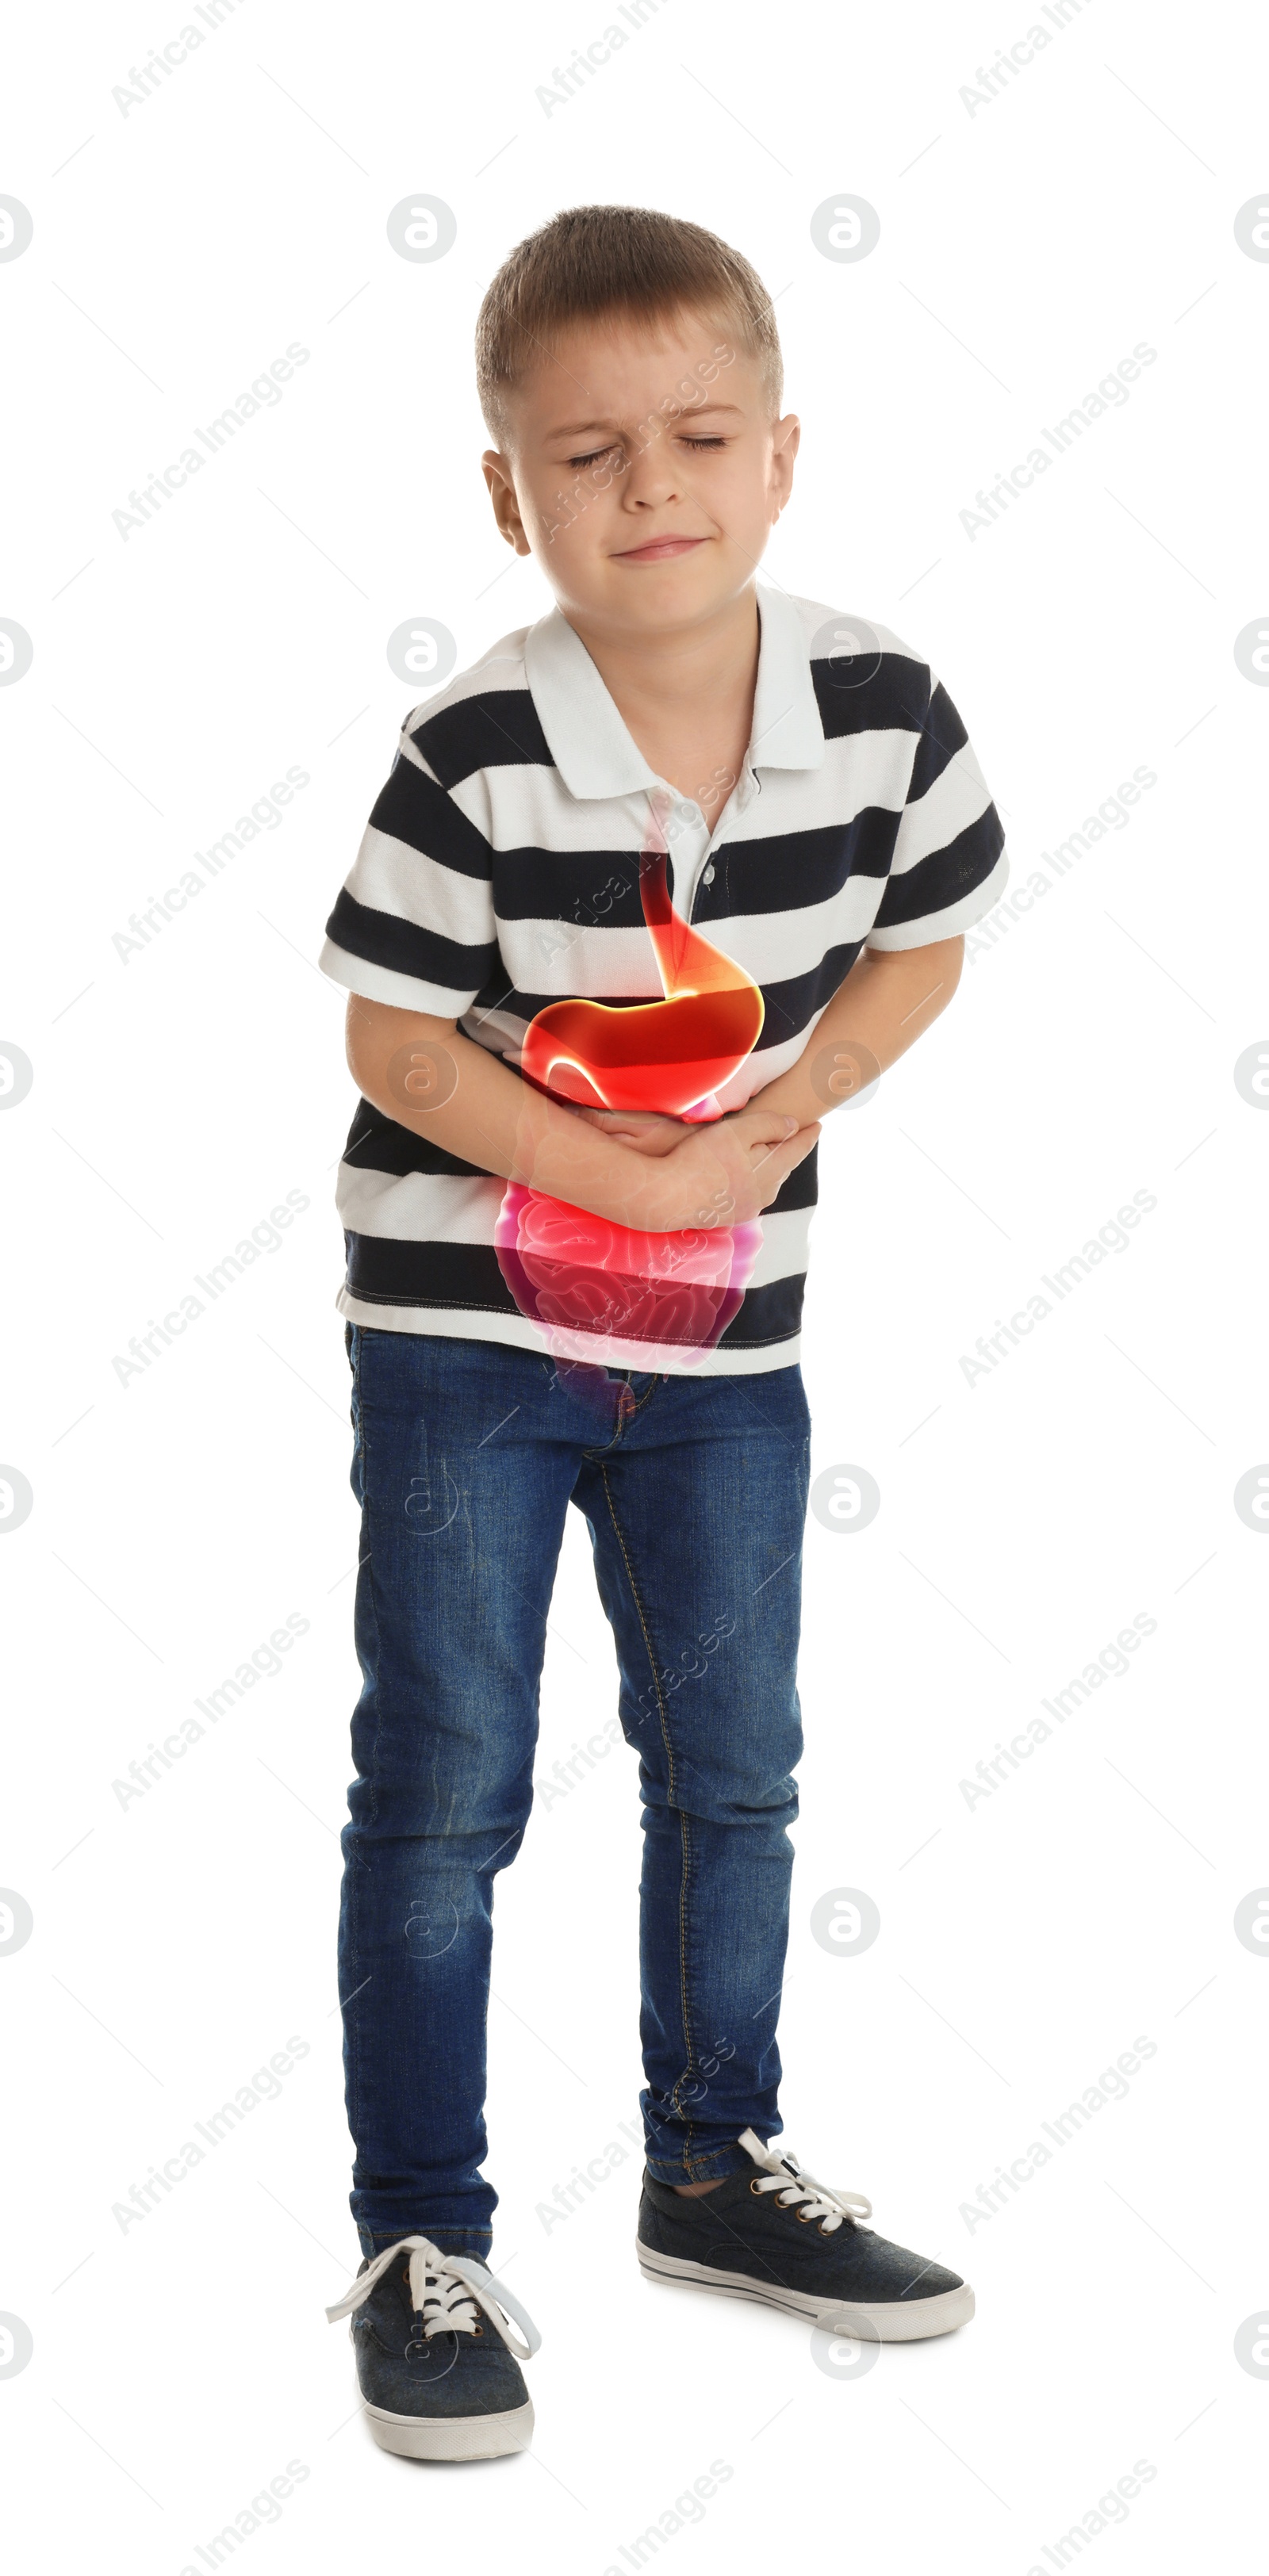 Image of Little boy suffering from stomach pain on white background